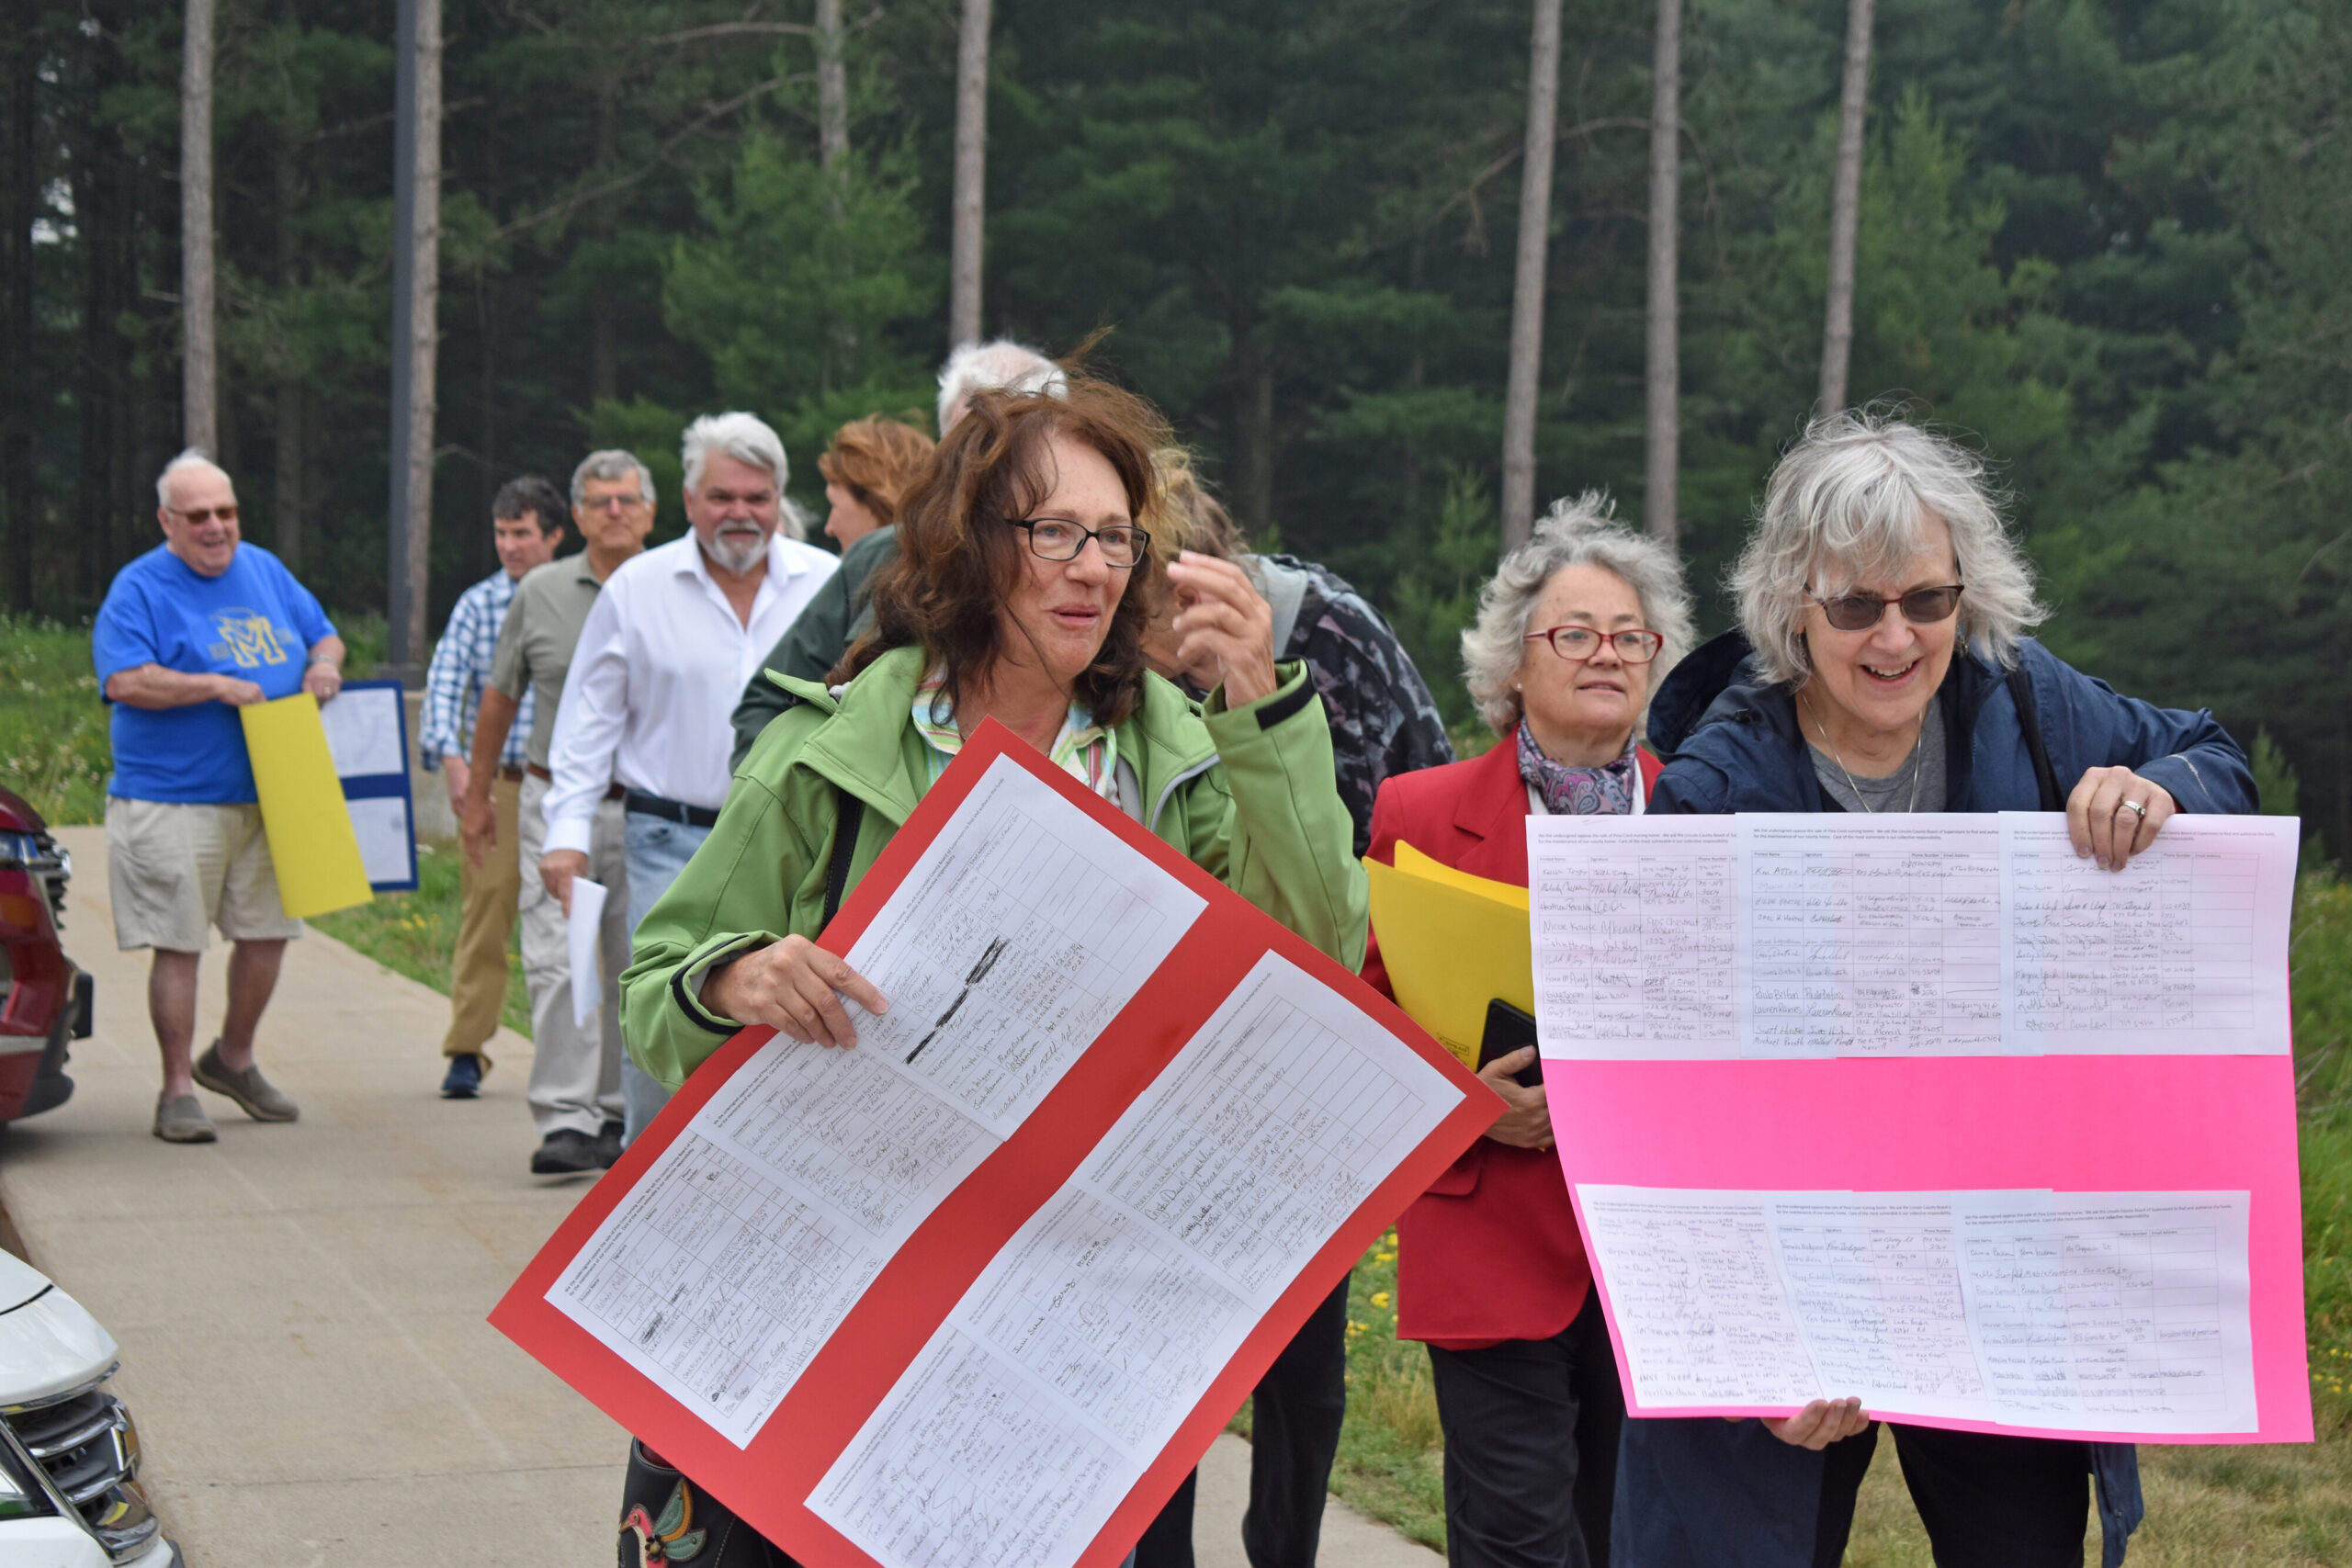 Community members march into a Lincoln County building to protest the possible sale of Pine Crest Nursing Home